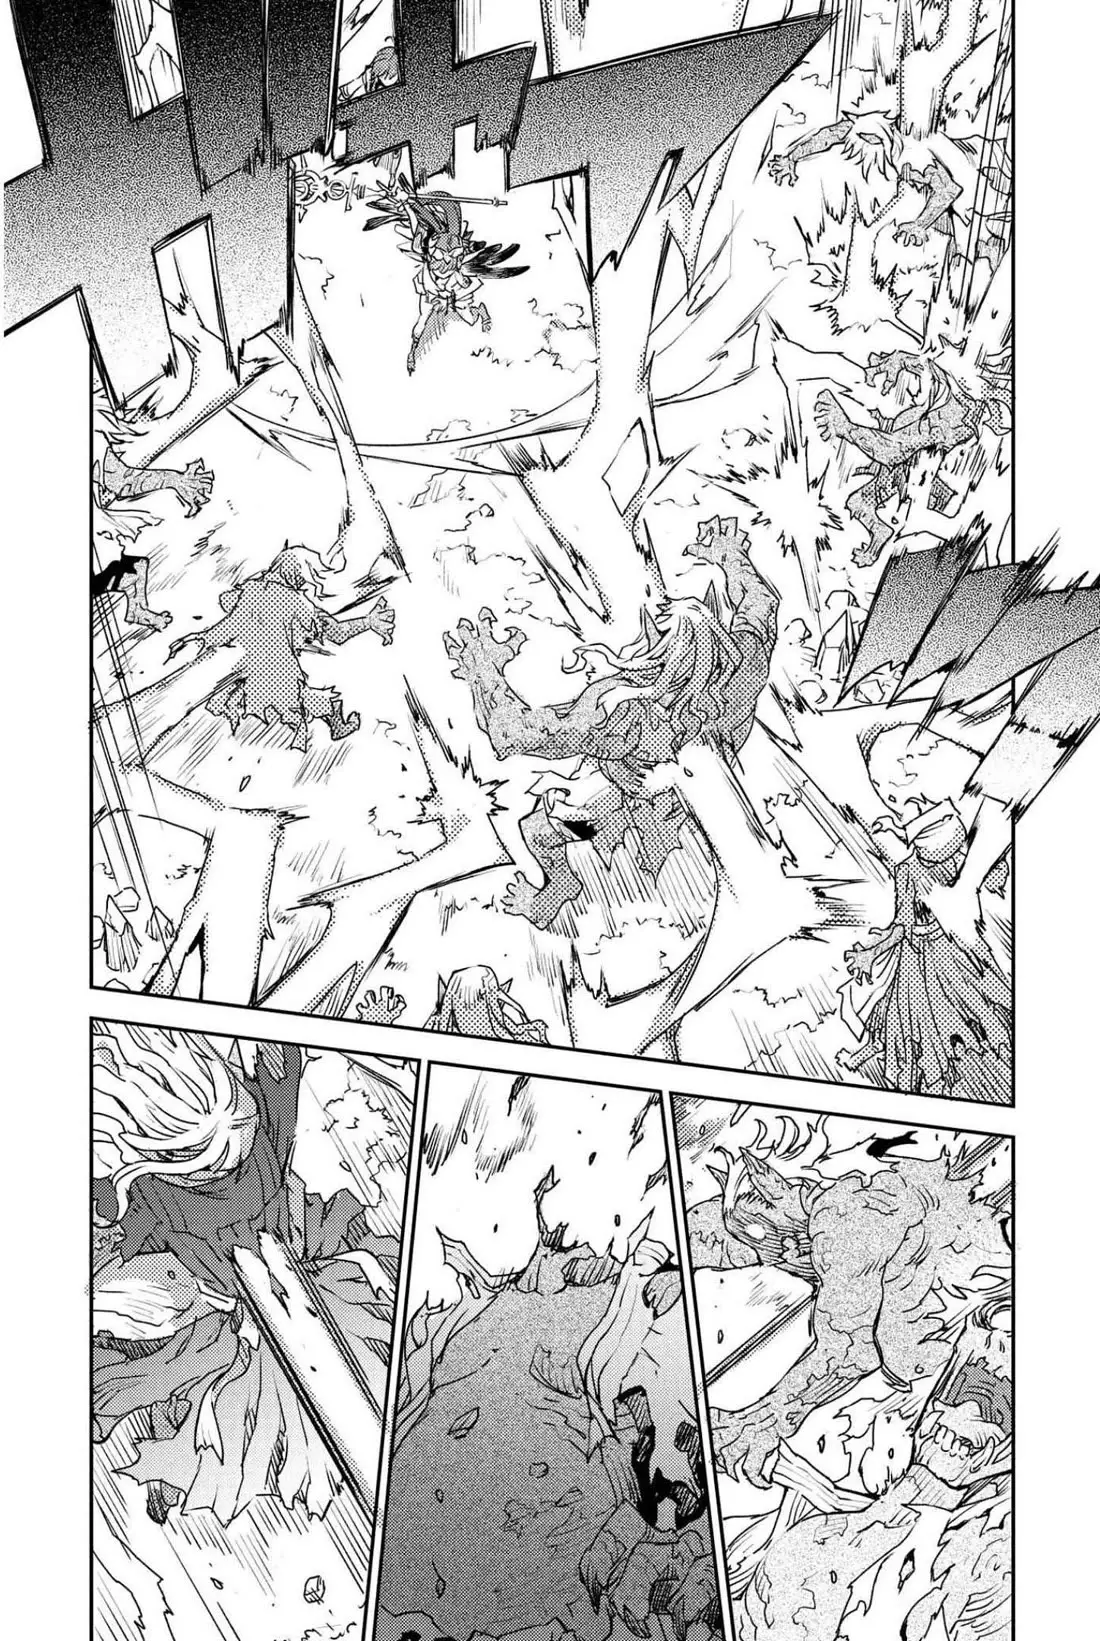 Fate/grand Order: Epic Of Remnant - Subspecies Singularity Iv: Taboo Advent Salem: Salem Of Heresy - 28 page 21-e6c9b27a